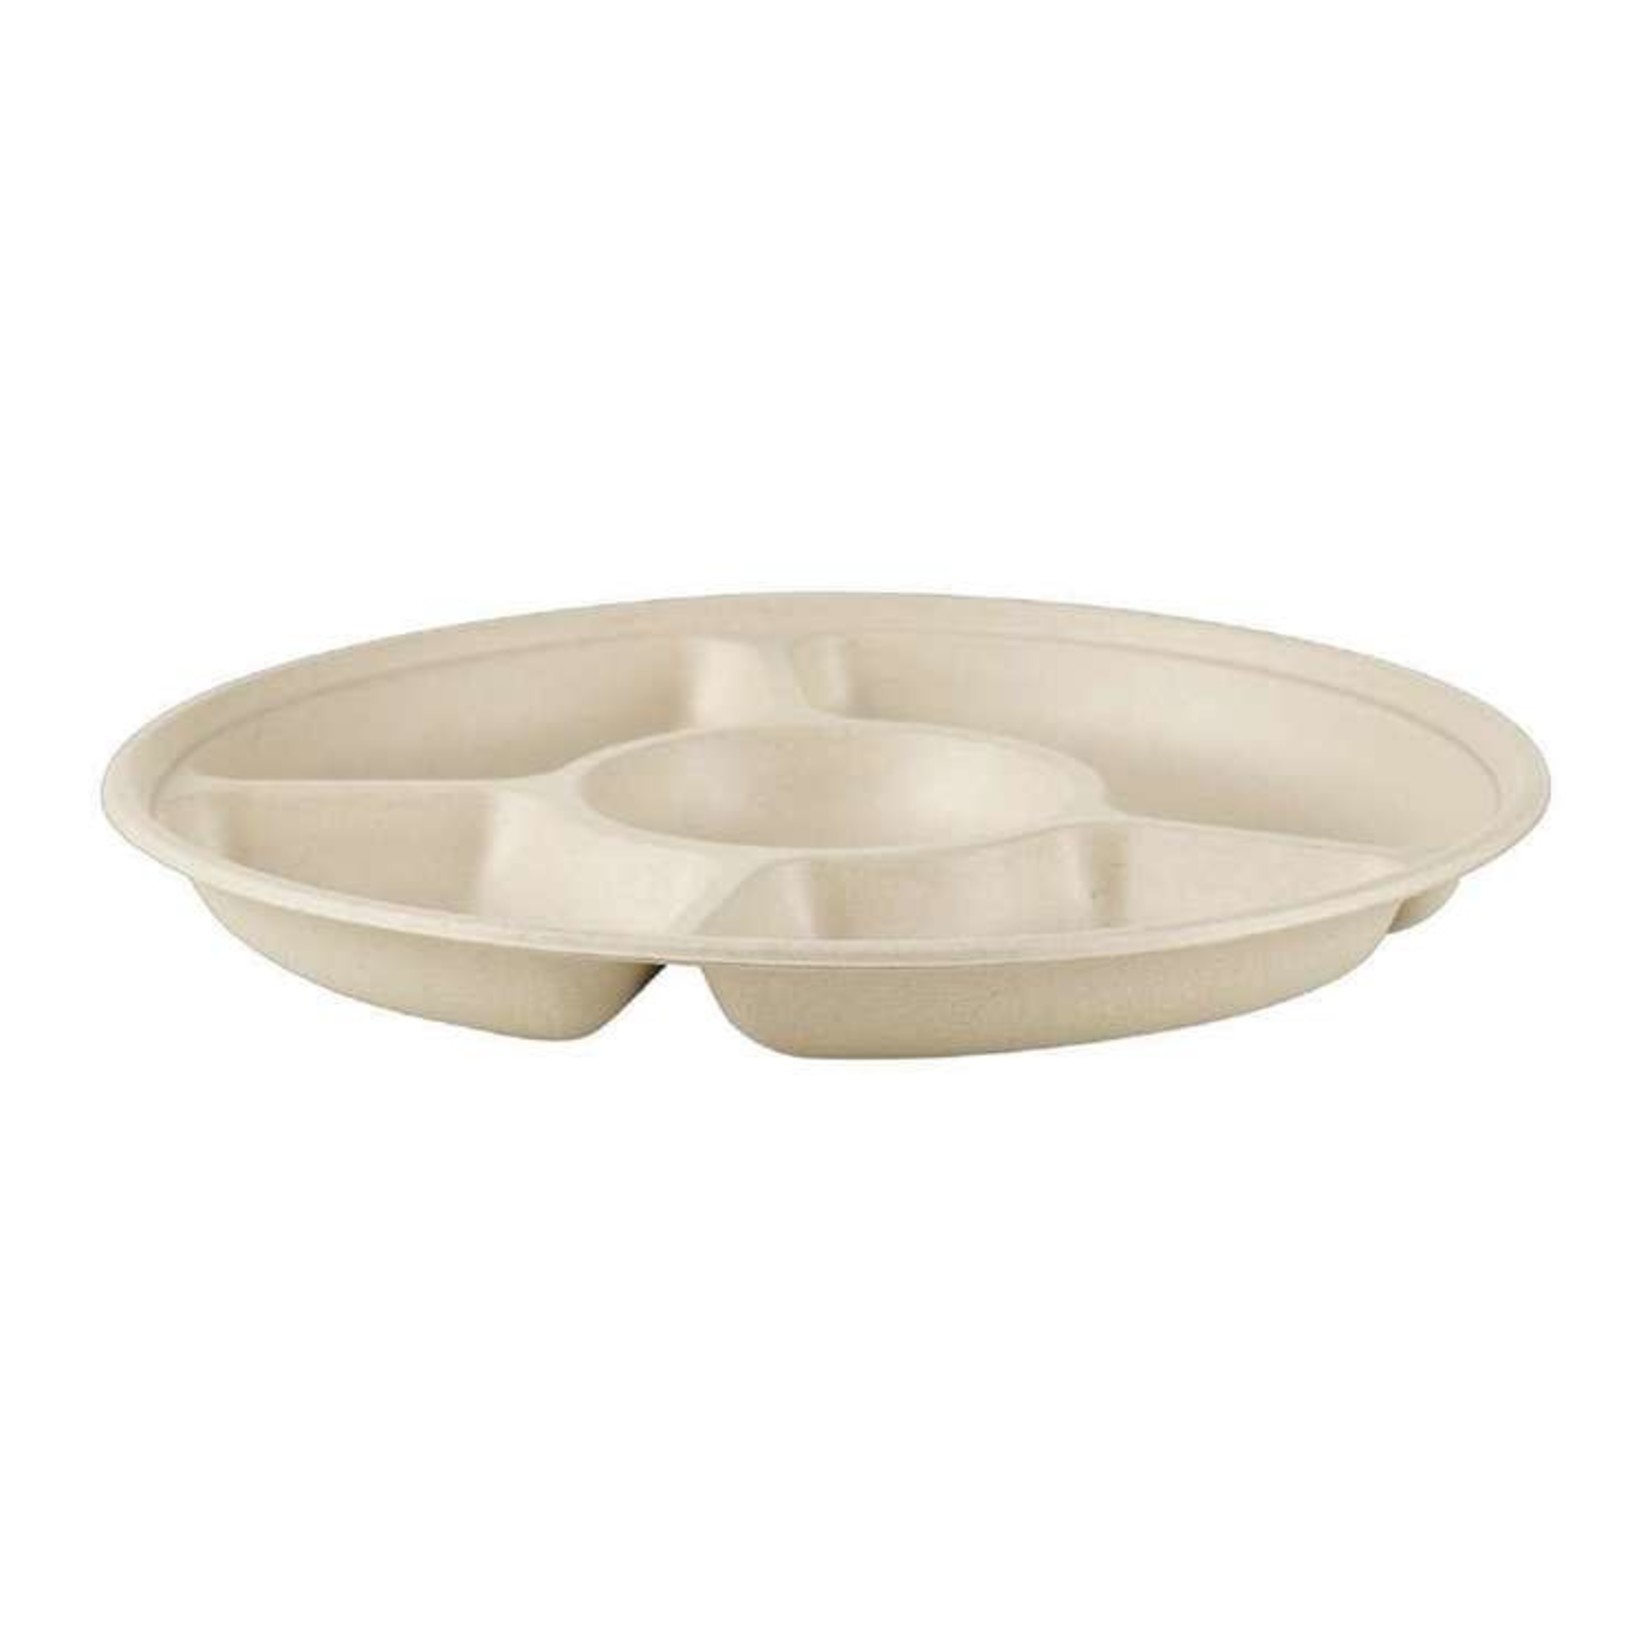 EcoSoulife EcoSoulife Harvest 5 Compartment Serving Tray 2 pack